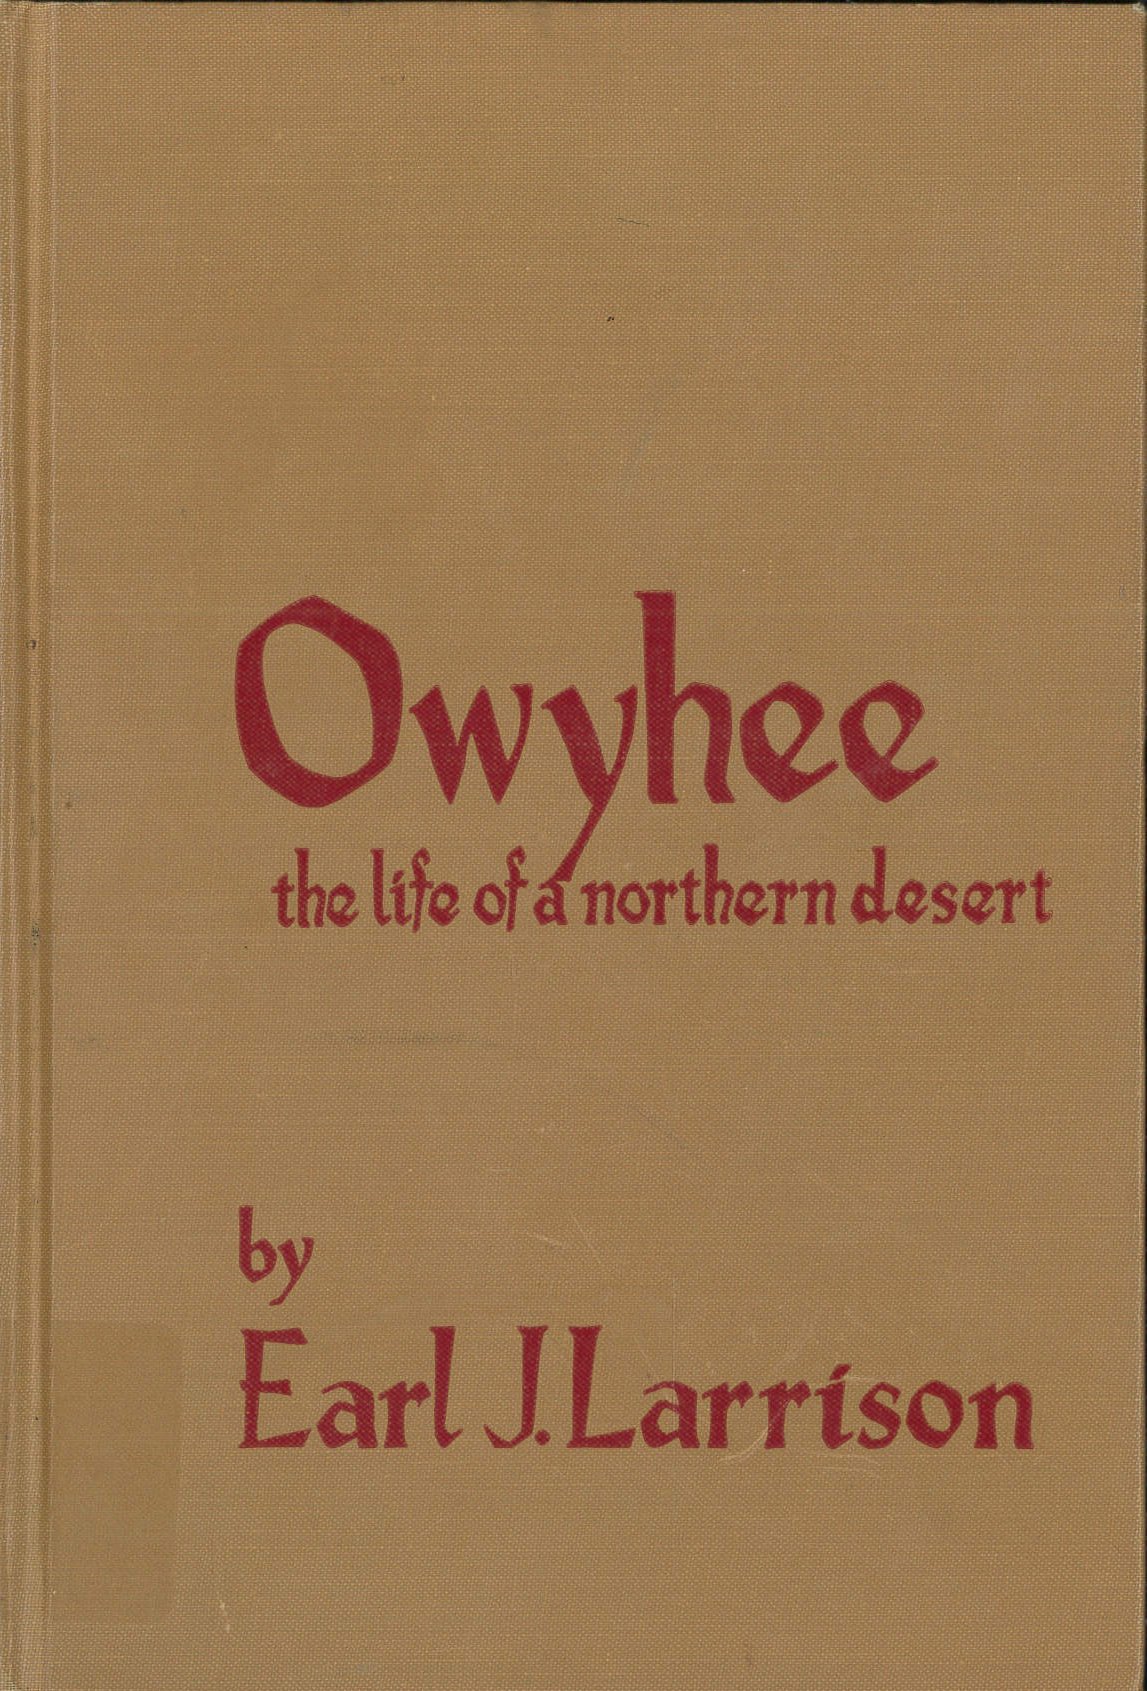 Owyhee county (Idaho): The life of a northern desert (book cover)